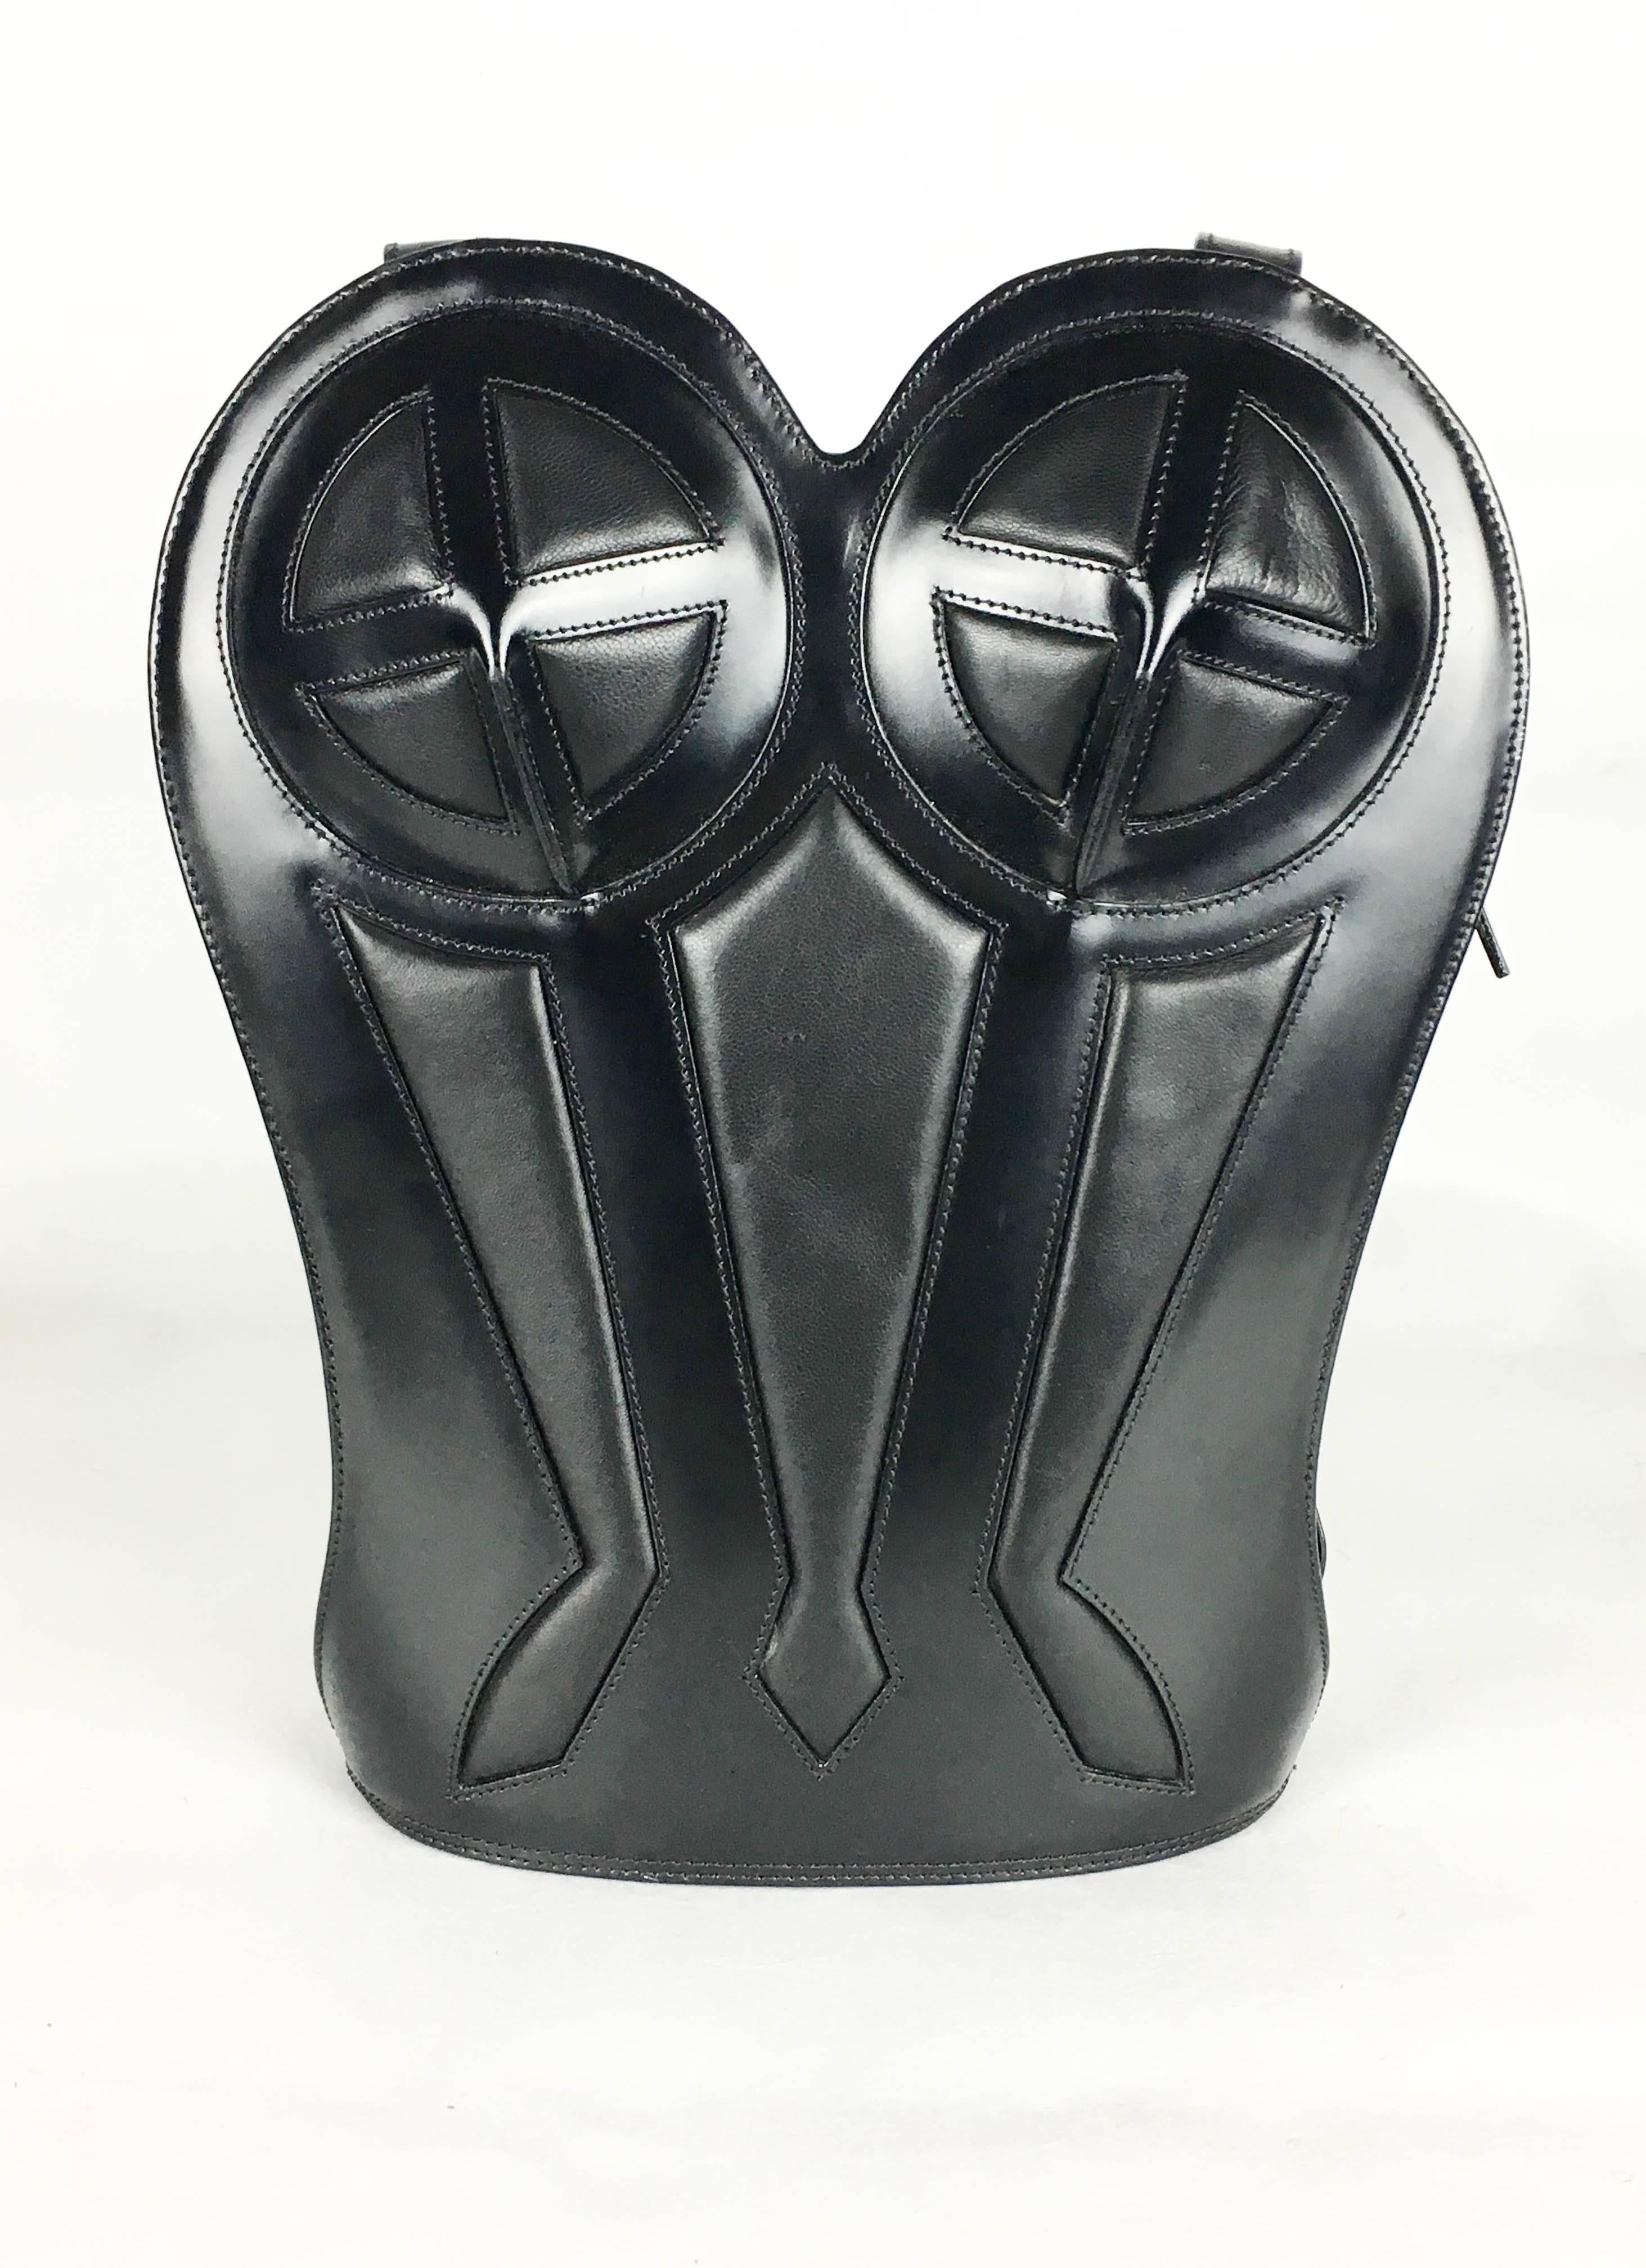 1998 Jean Paul Gaultier Black Leather Bustier Backpack In Excellent Condition For Sale In London, Chelsea